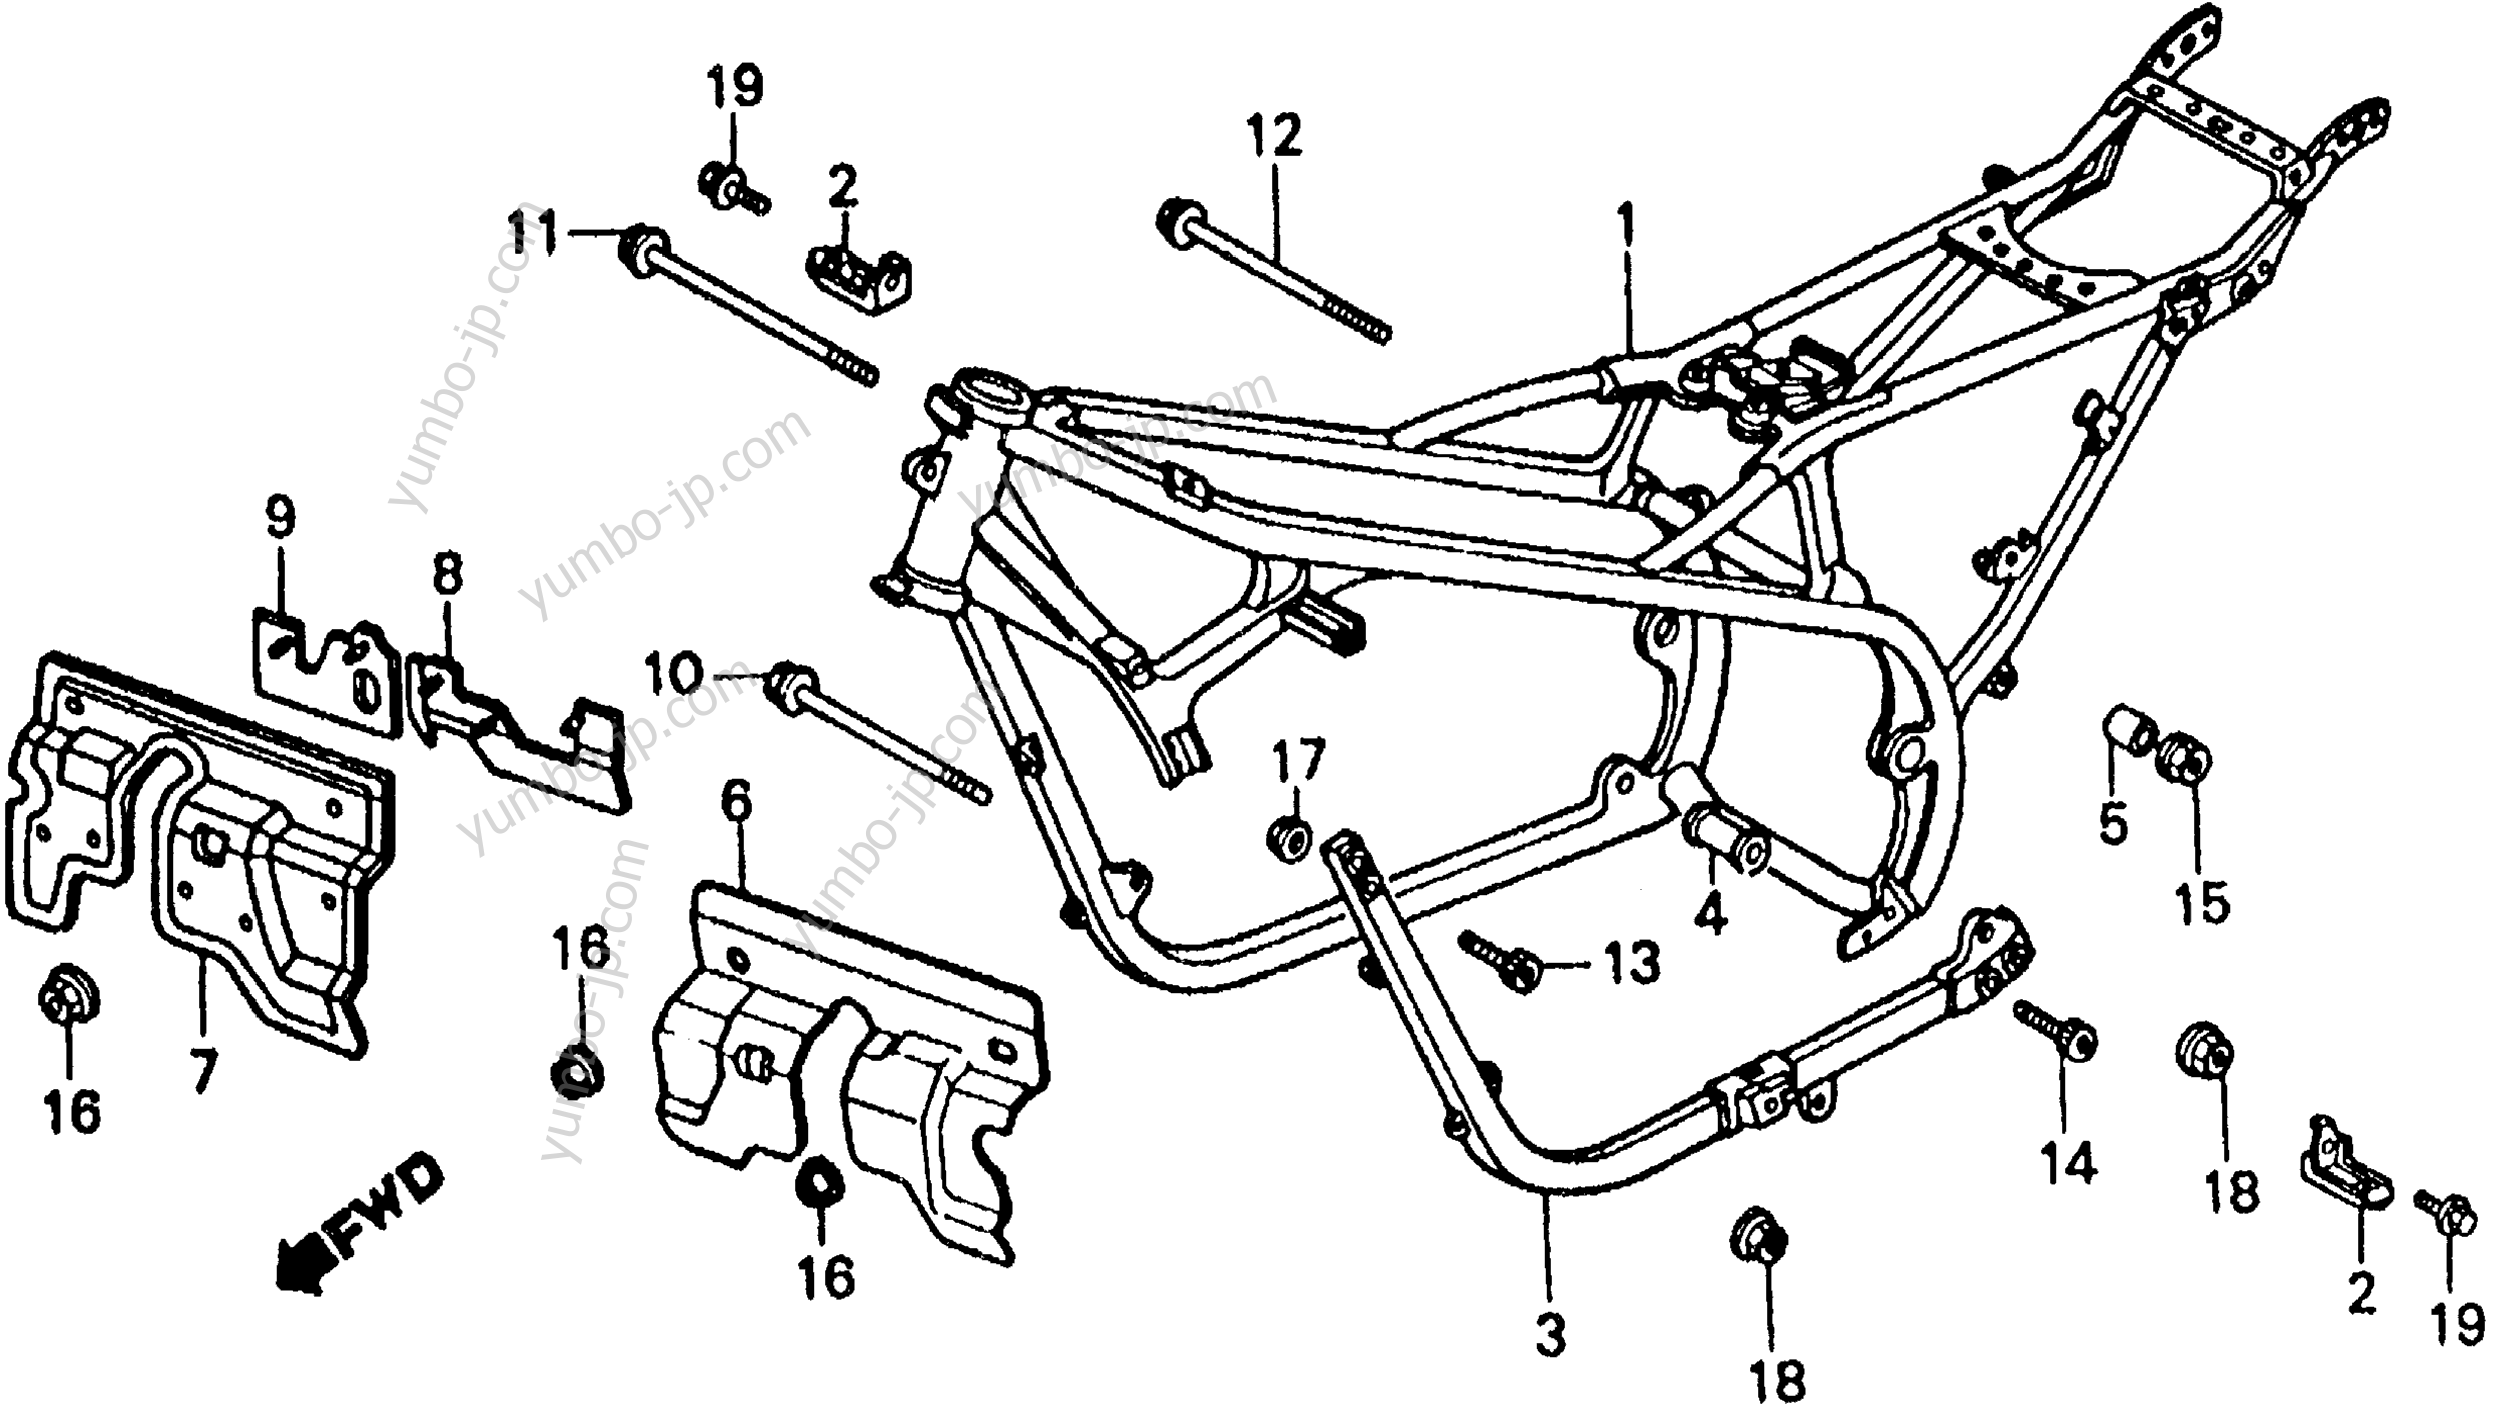 FRAME for motorcycles HONDA VF500F A 1985 year